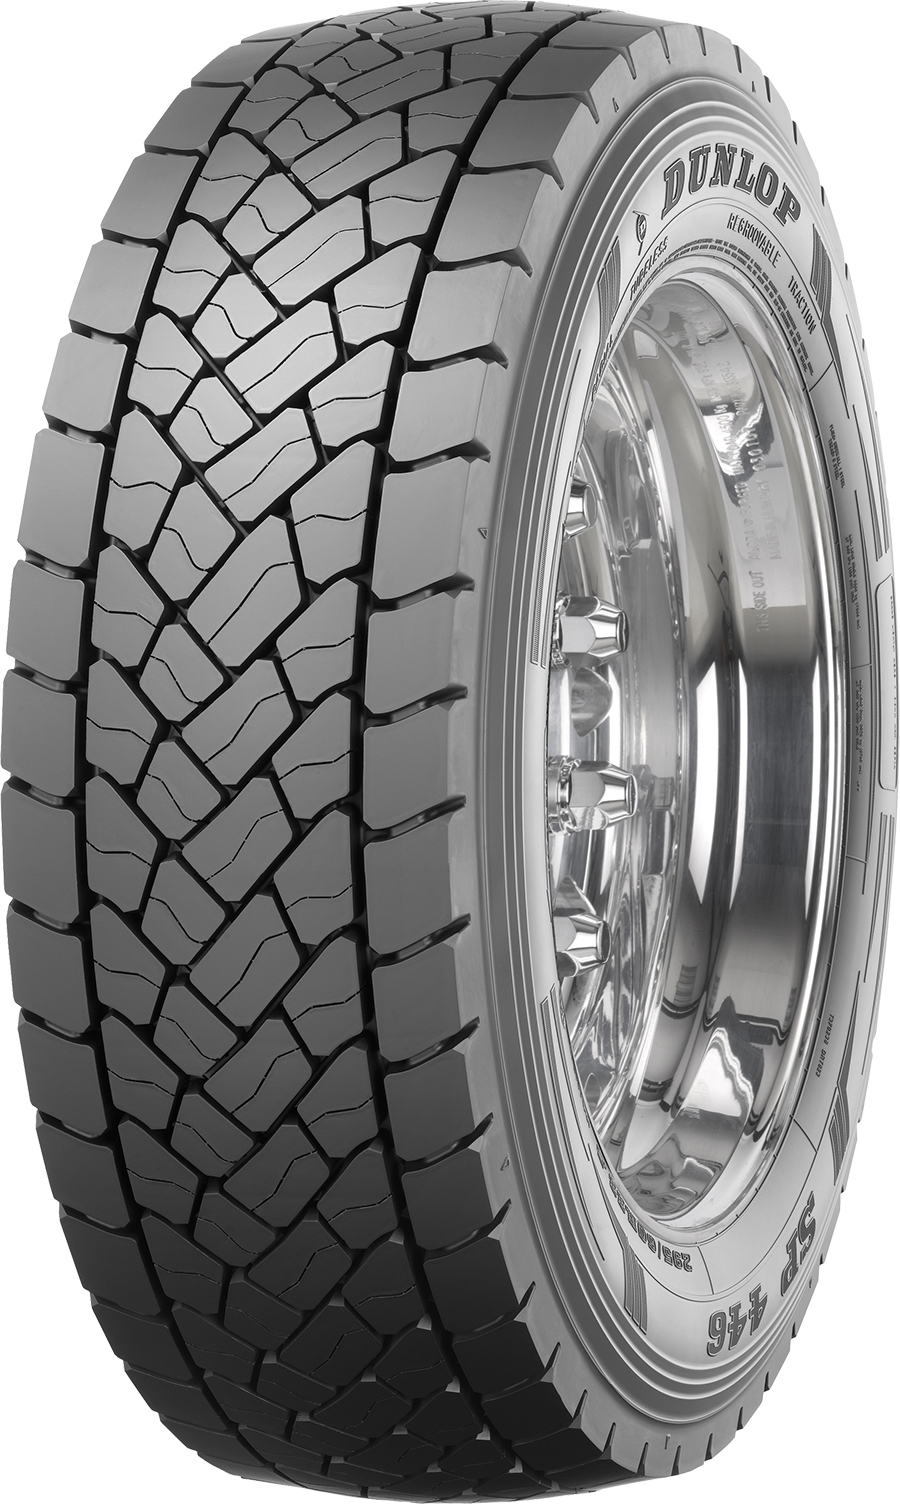 product_type-heavy_tires DUNLOP SP446 16 TL 295/60 R22.5 150K